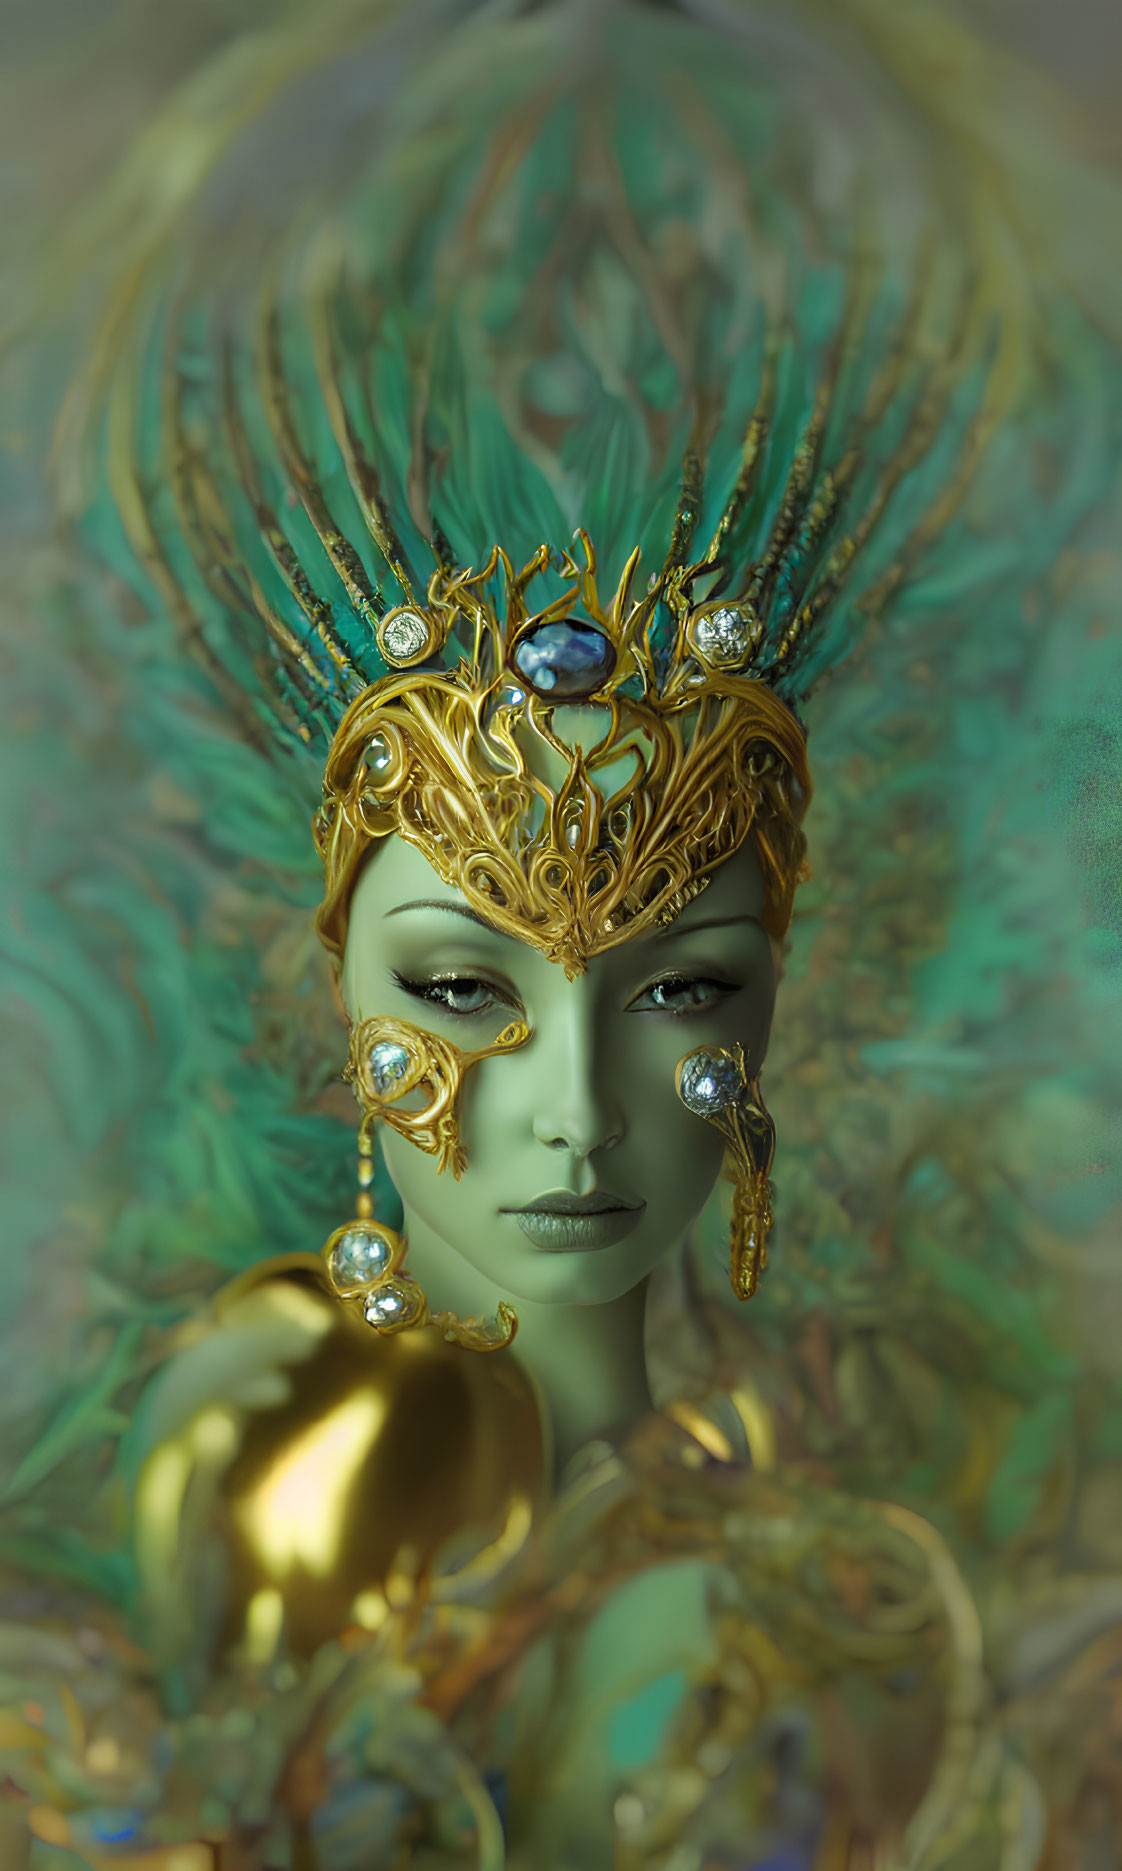 Green-skinned regal figure with golden crown and orb on pastel backdrop.